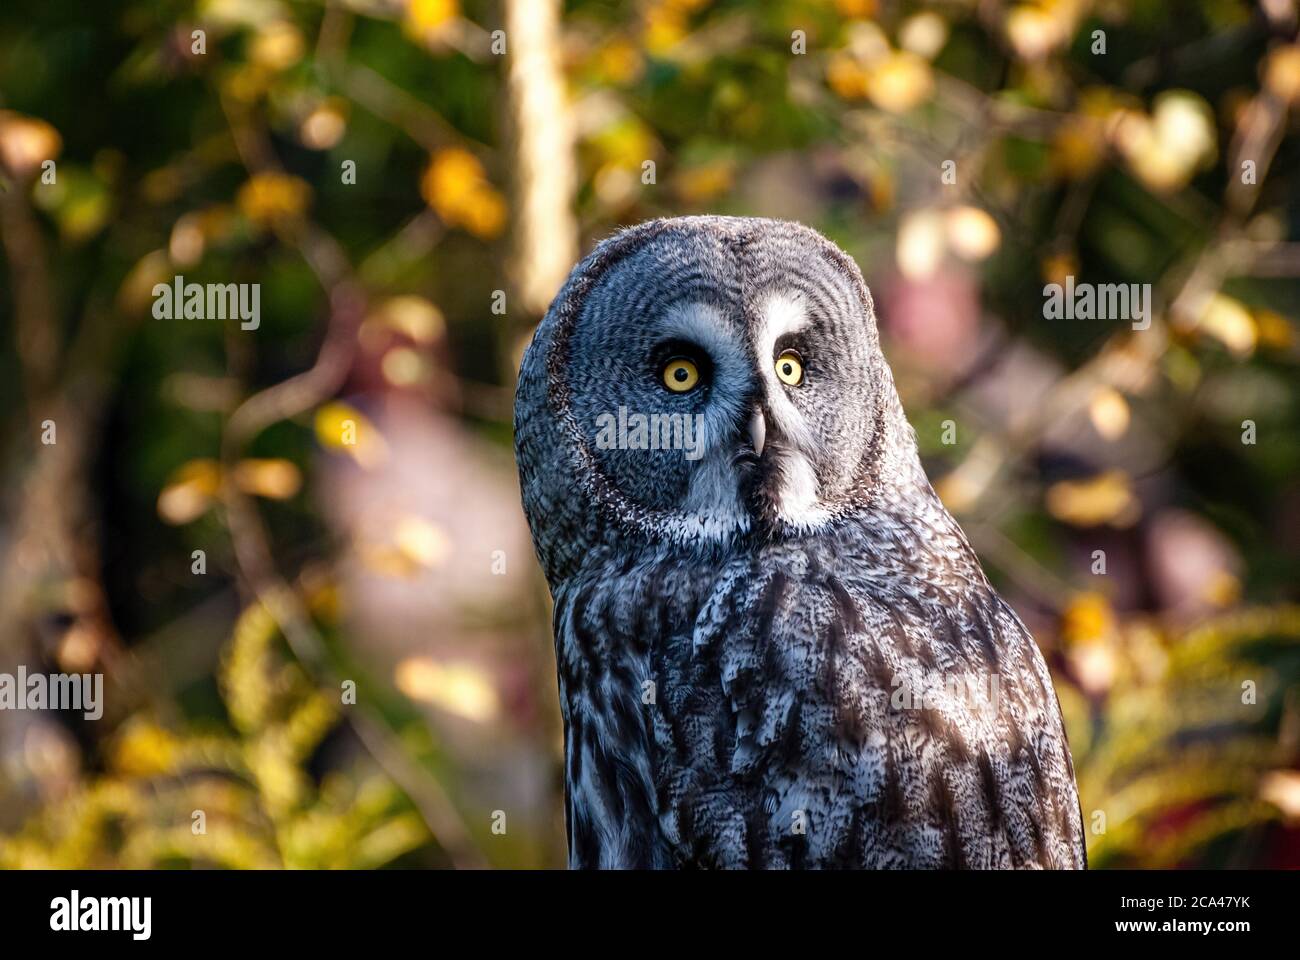 The great grey owl or great gray owl (Strix nebulosa) is a very large owl. Stock Photo